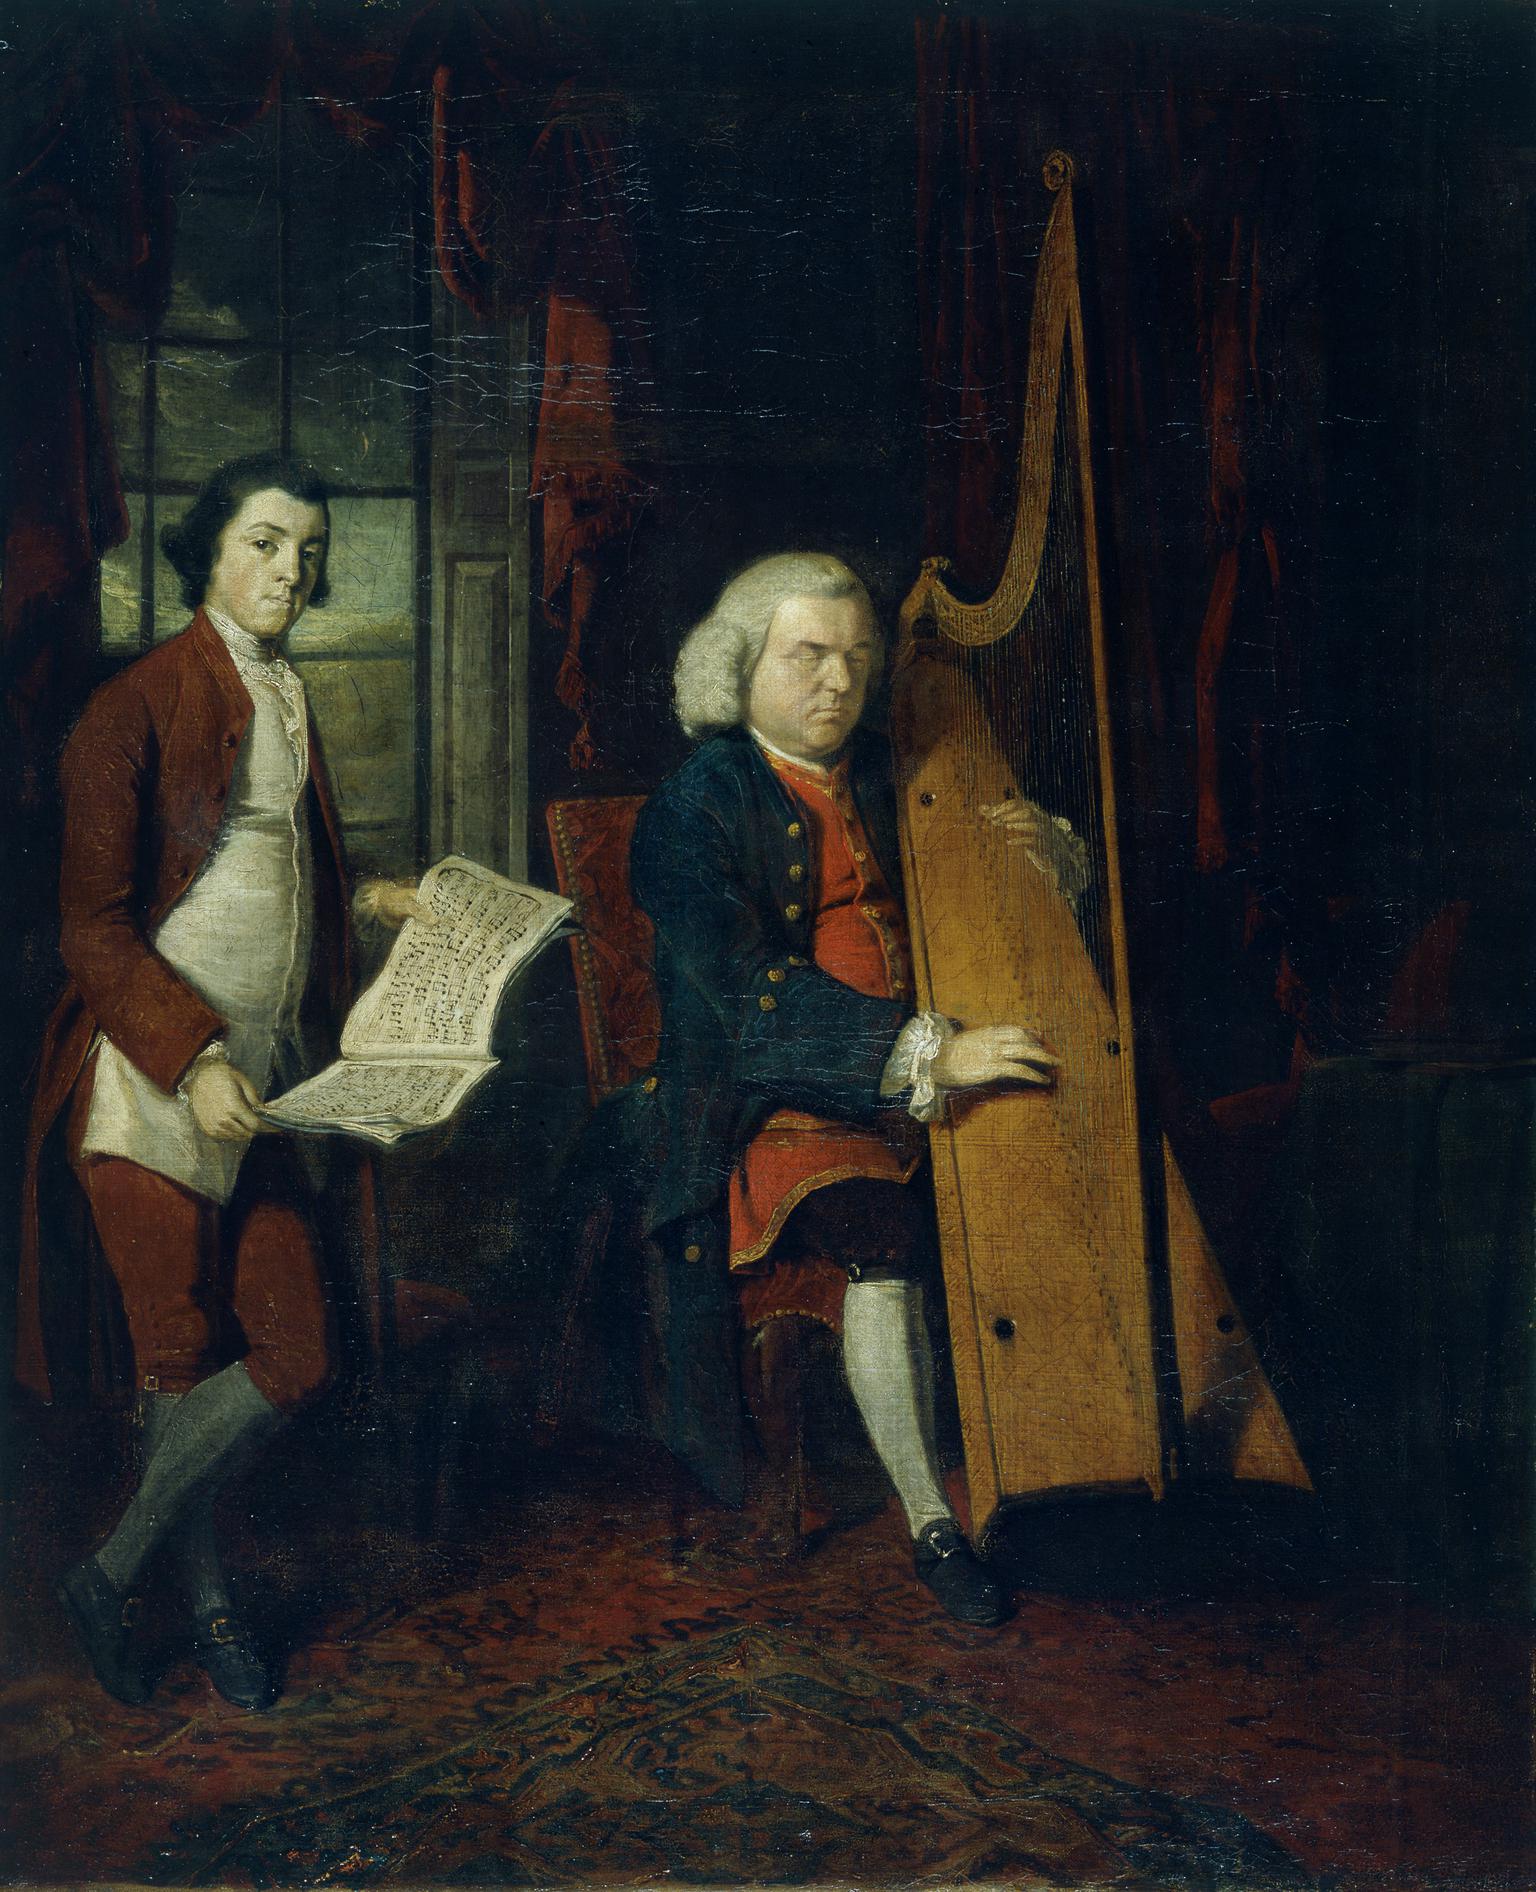 John Parry the Blind Harpist with an assistant holding a book of music